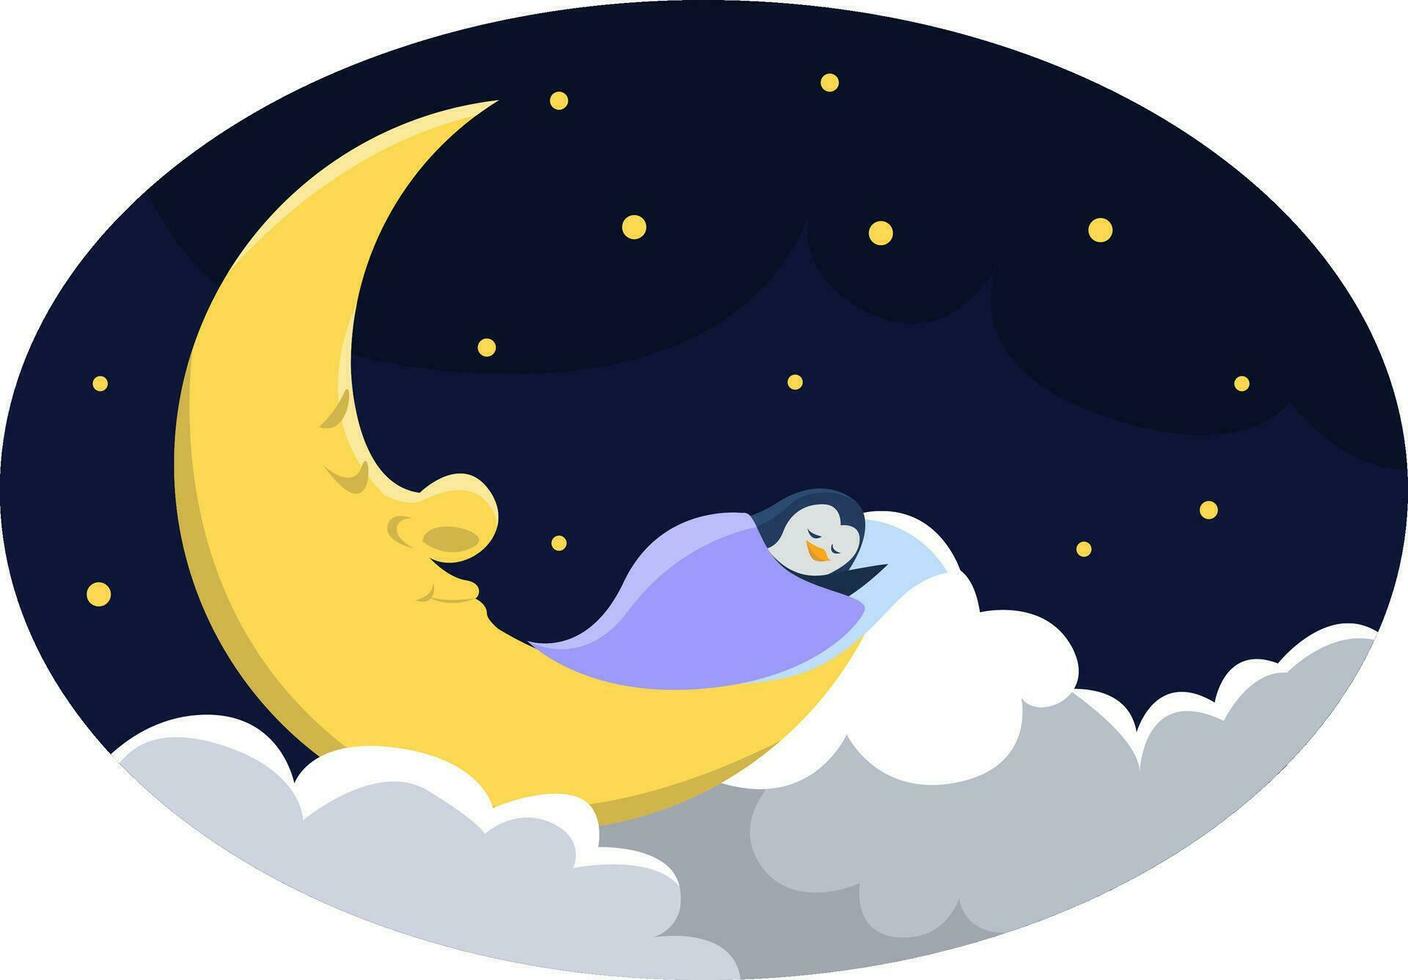 Penguin dream on the moon, illustration, vector on a white background.